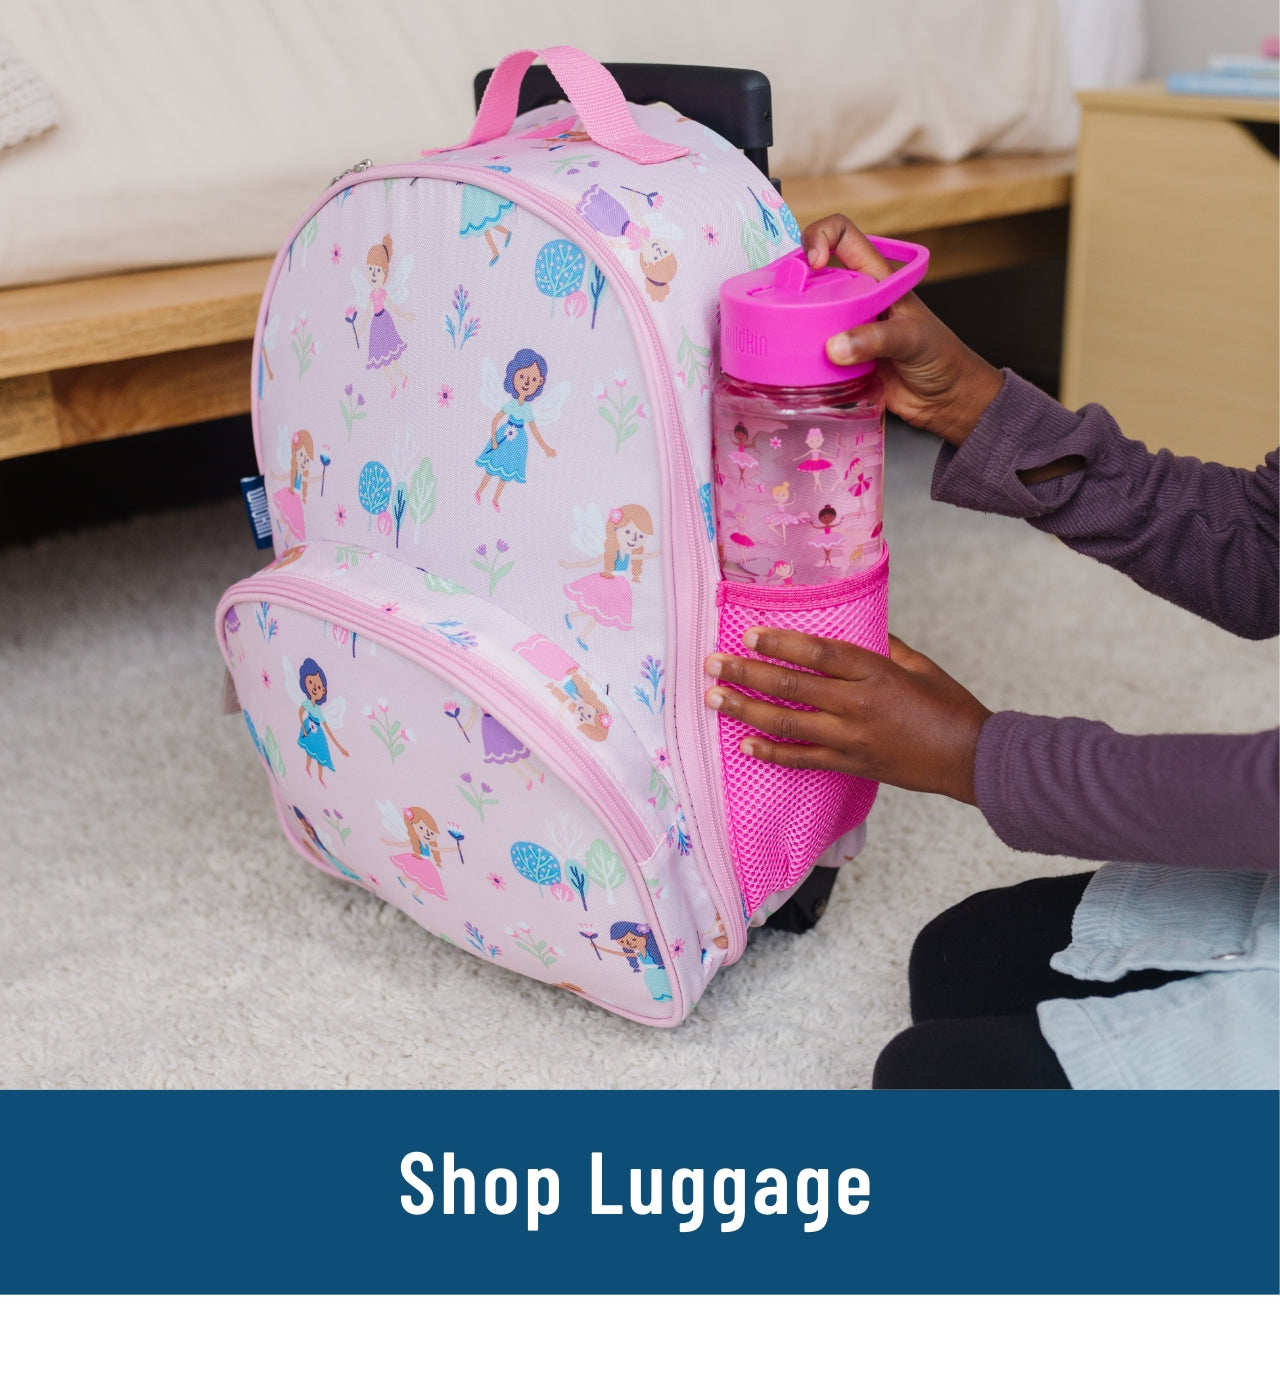 Image of a girl's hands putting a ballerina water bottle into the mesh side pocket of a rolling luggage suitcase with Fairy Garden pattern. Link to Shop Luggage